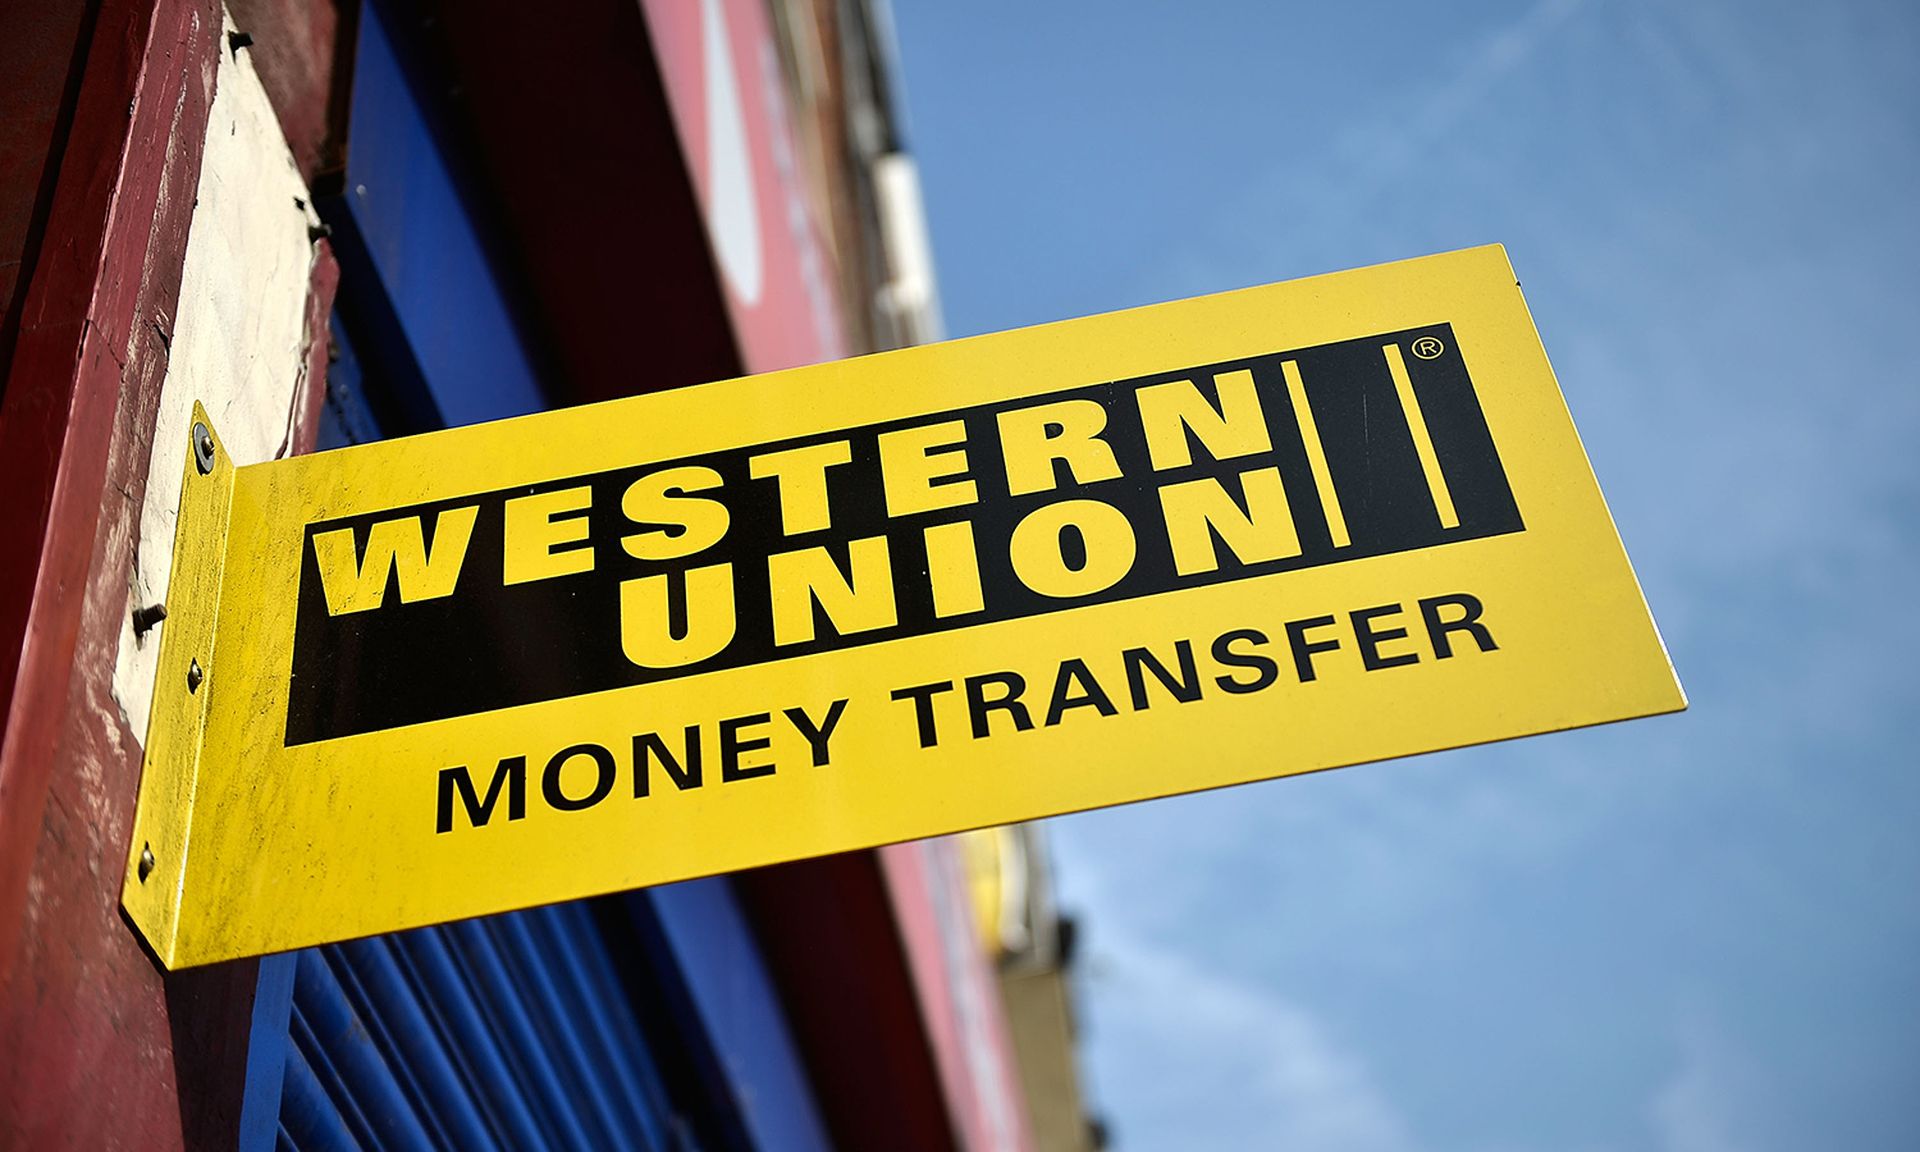 Identity service provider Okta was used to breach a number of financial services, including Western Union. Pictured: A money transfer shop is seen Sept. 24, 2013, in London. (Photo by Bethany Clarke/Getty Images)